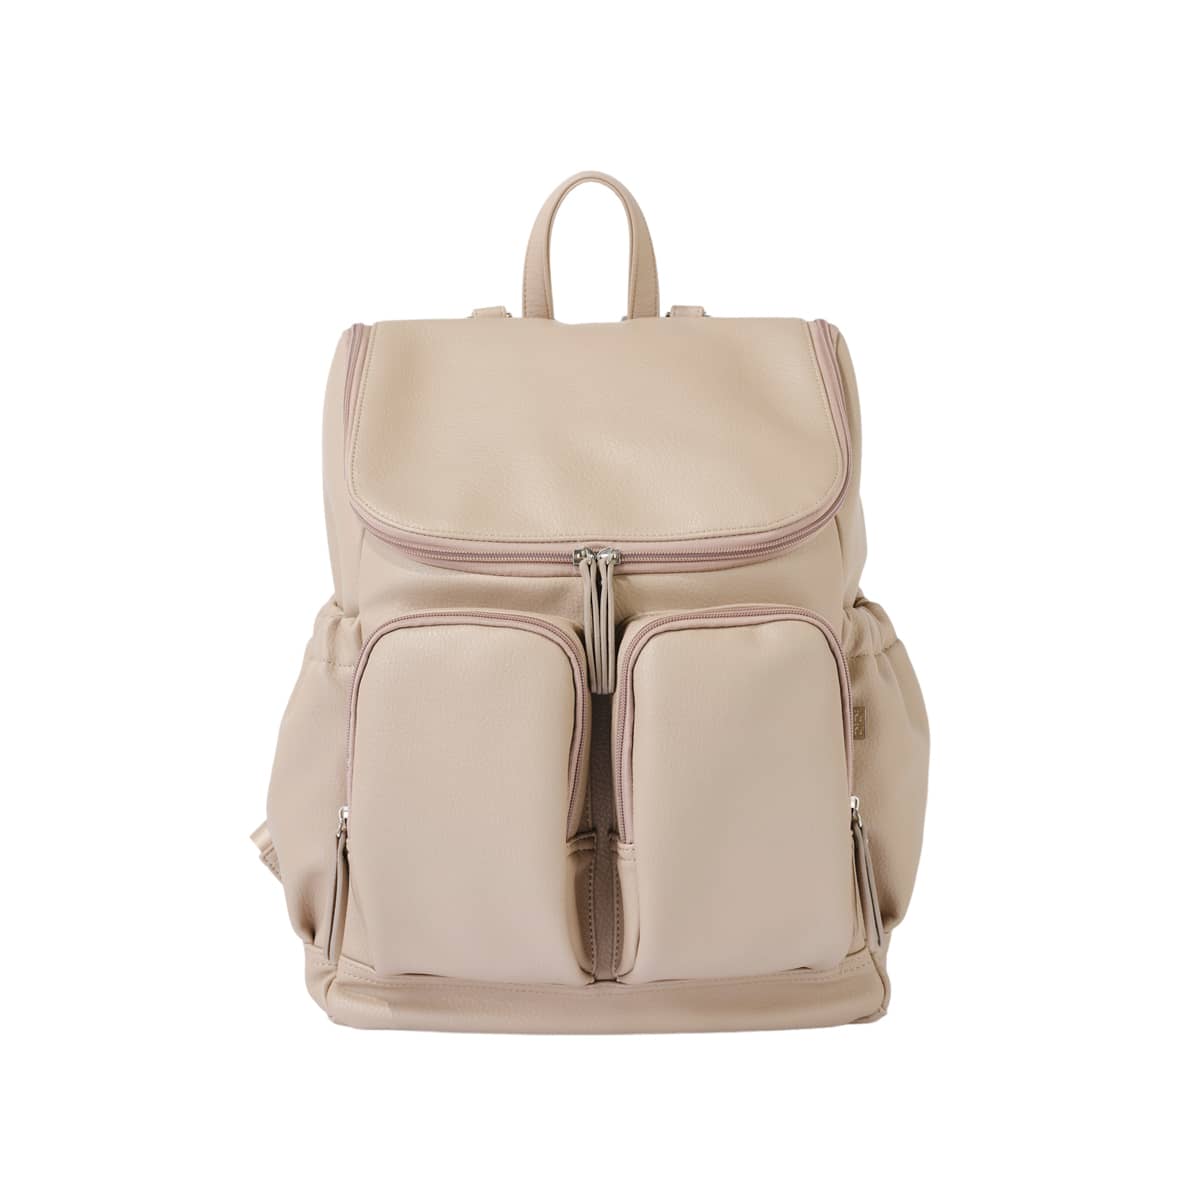 OiOi Faux Leather Nappy Backpack - Oat Dimple